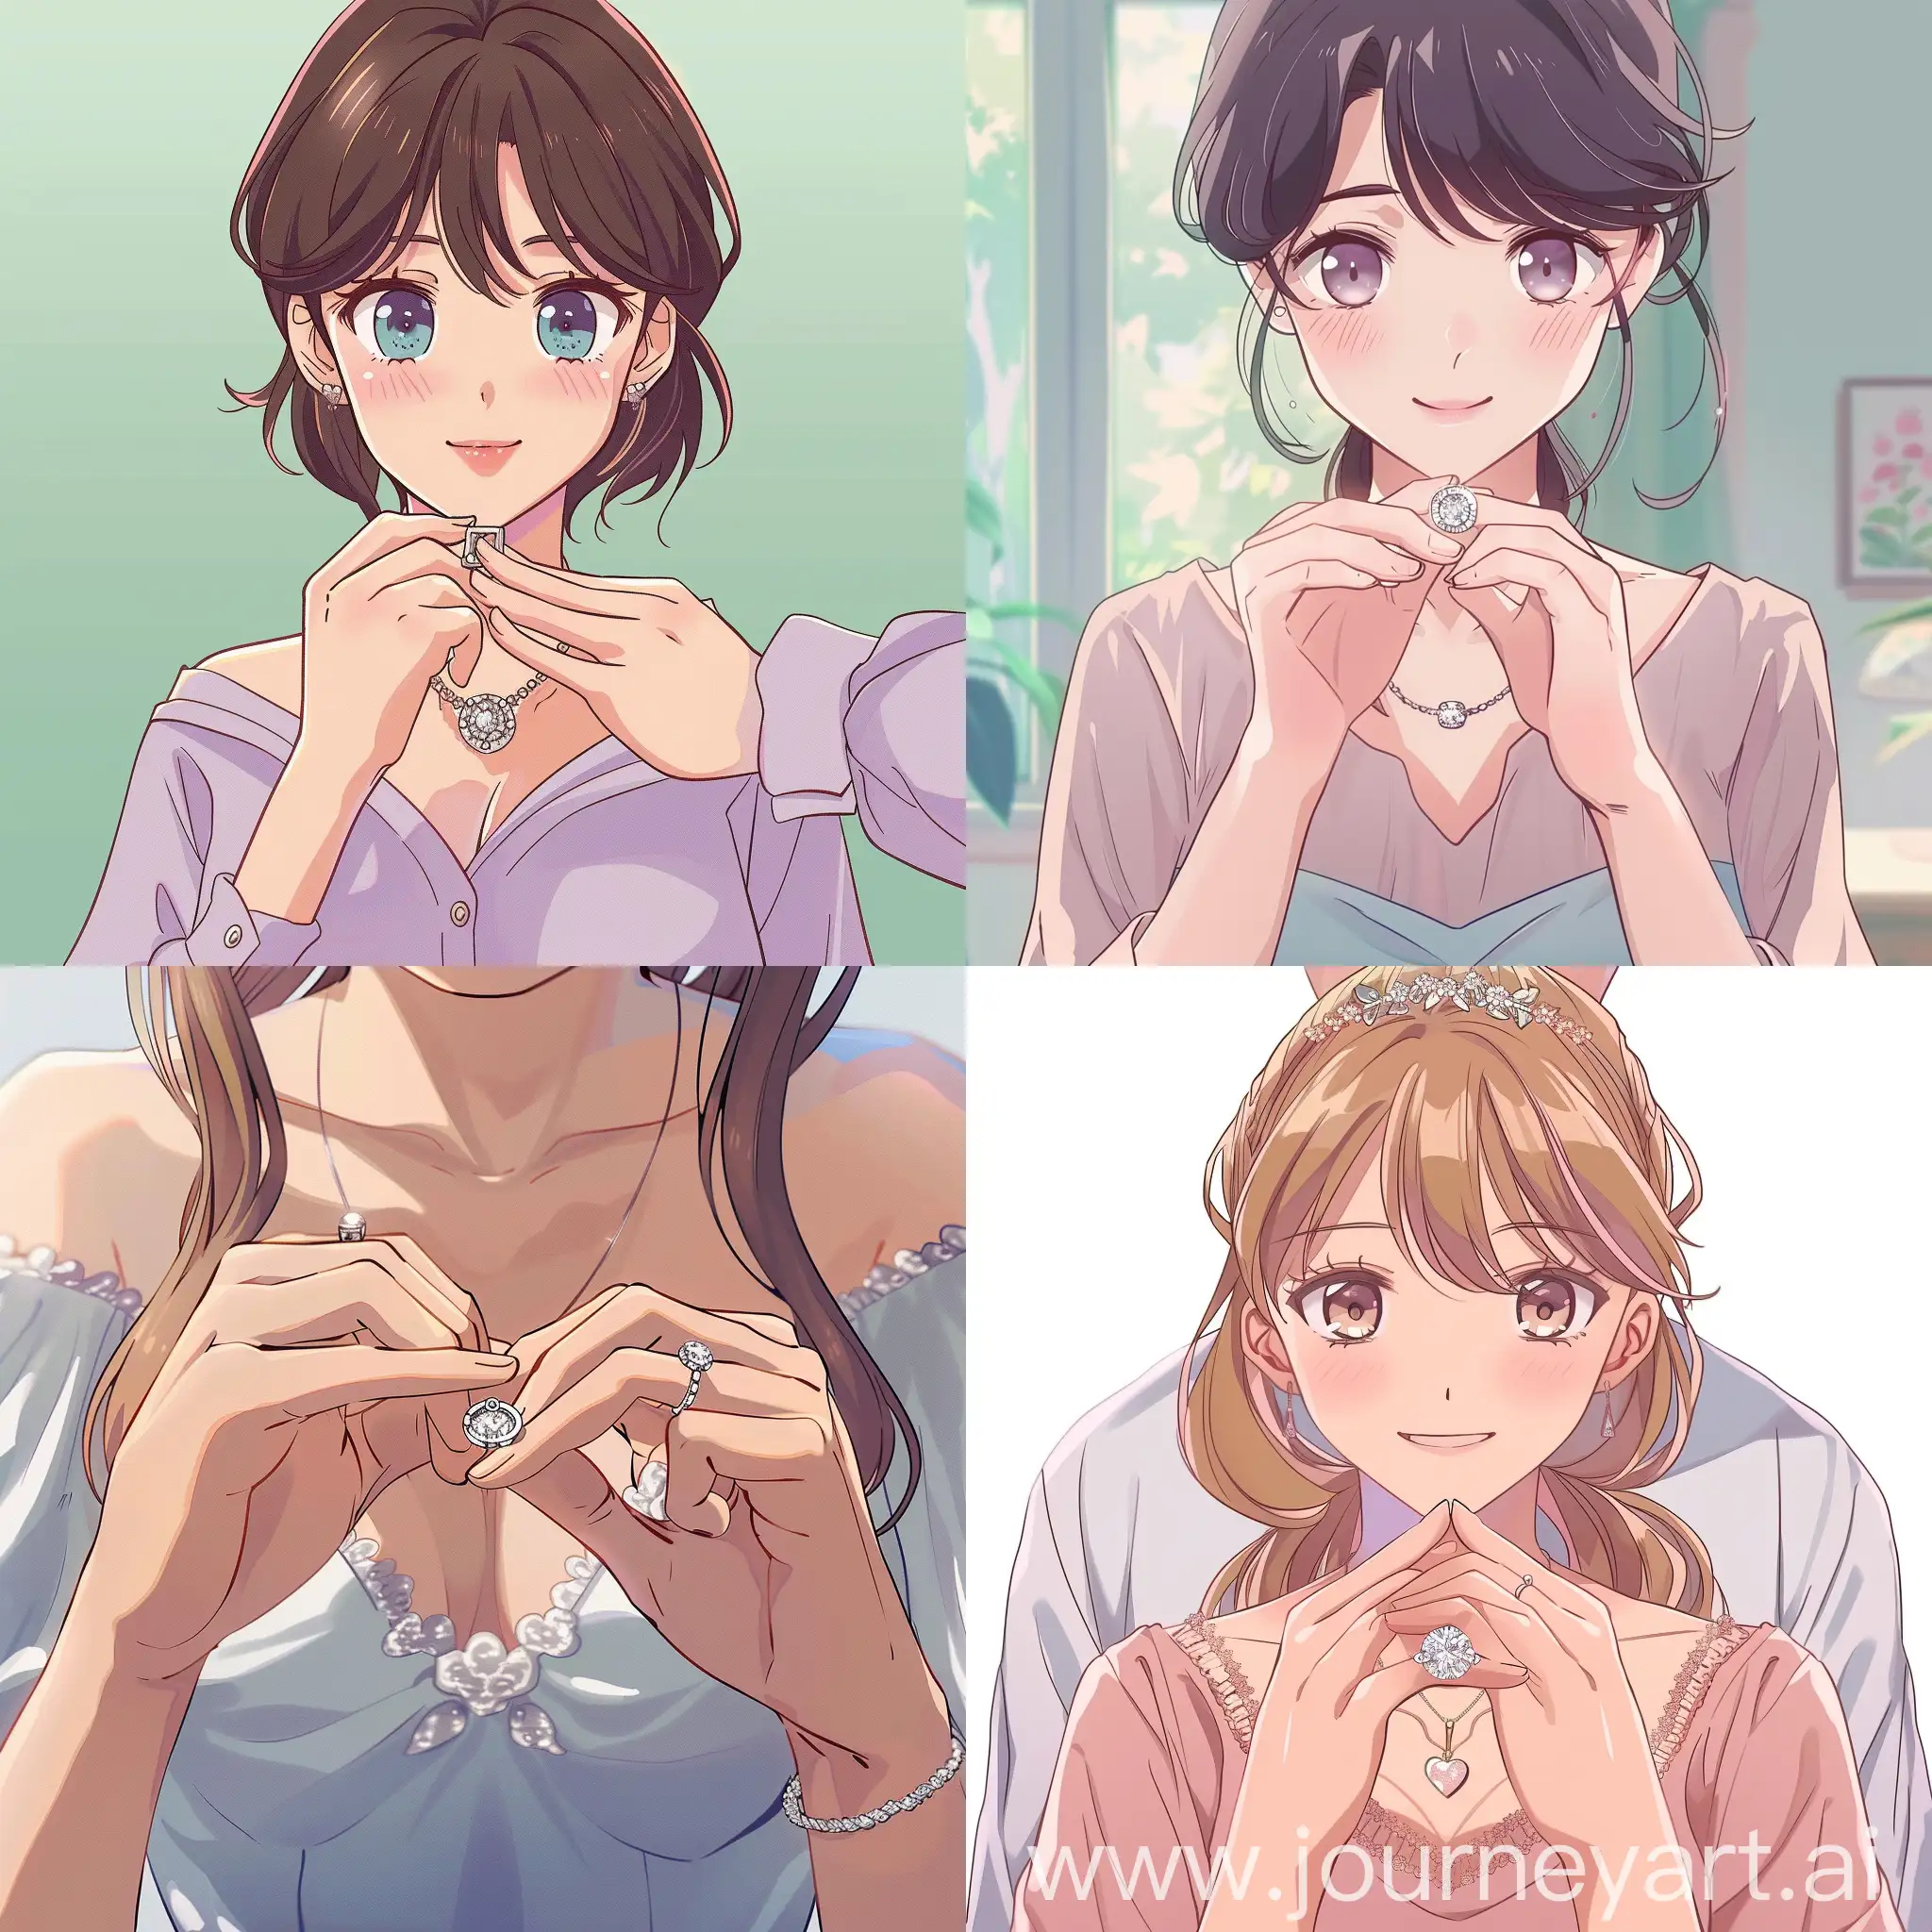 Anime-Style-Proposal-Putting-an-Engagement-Ring-on-Her-Finger